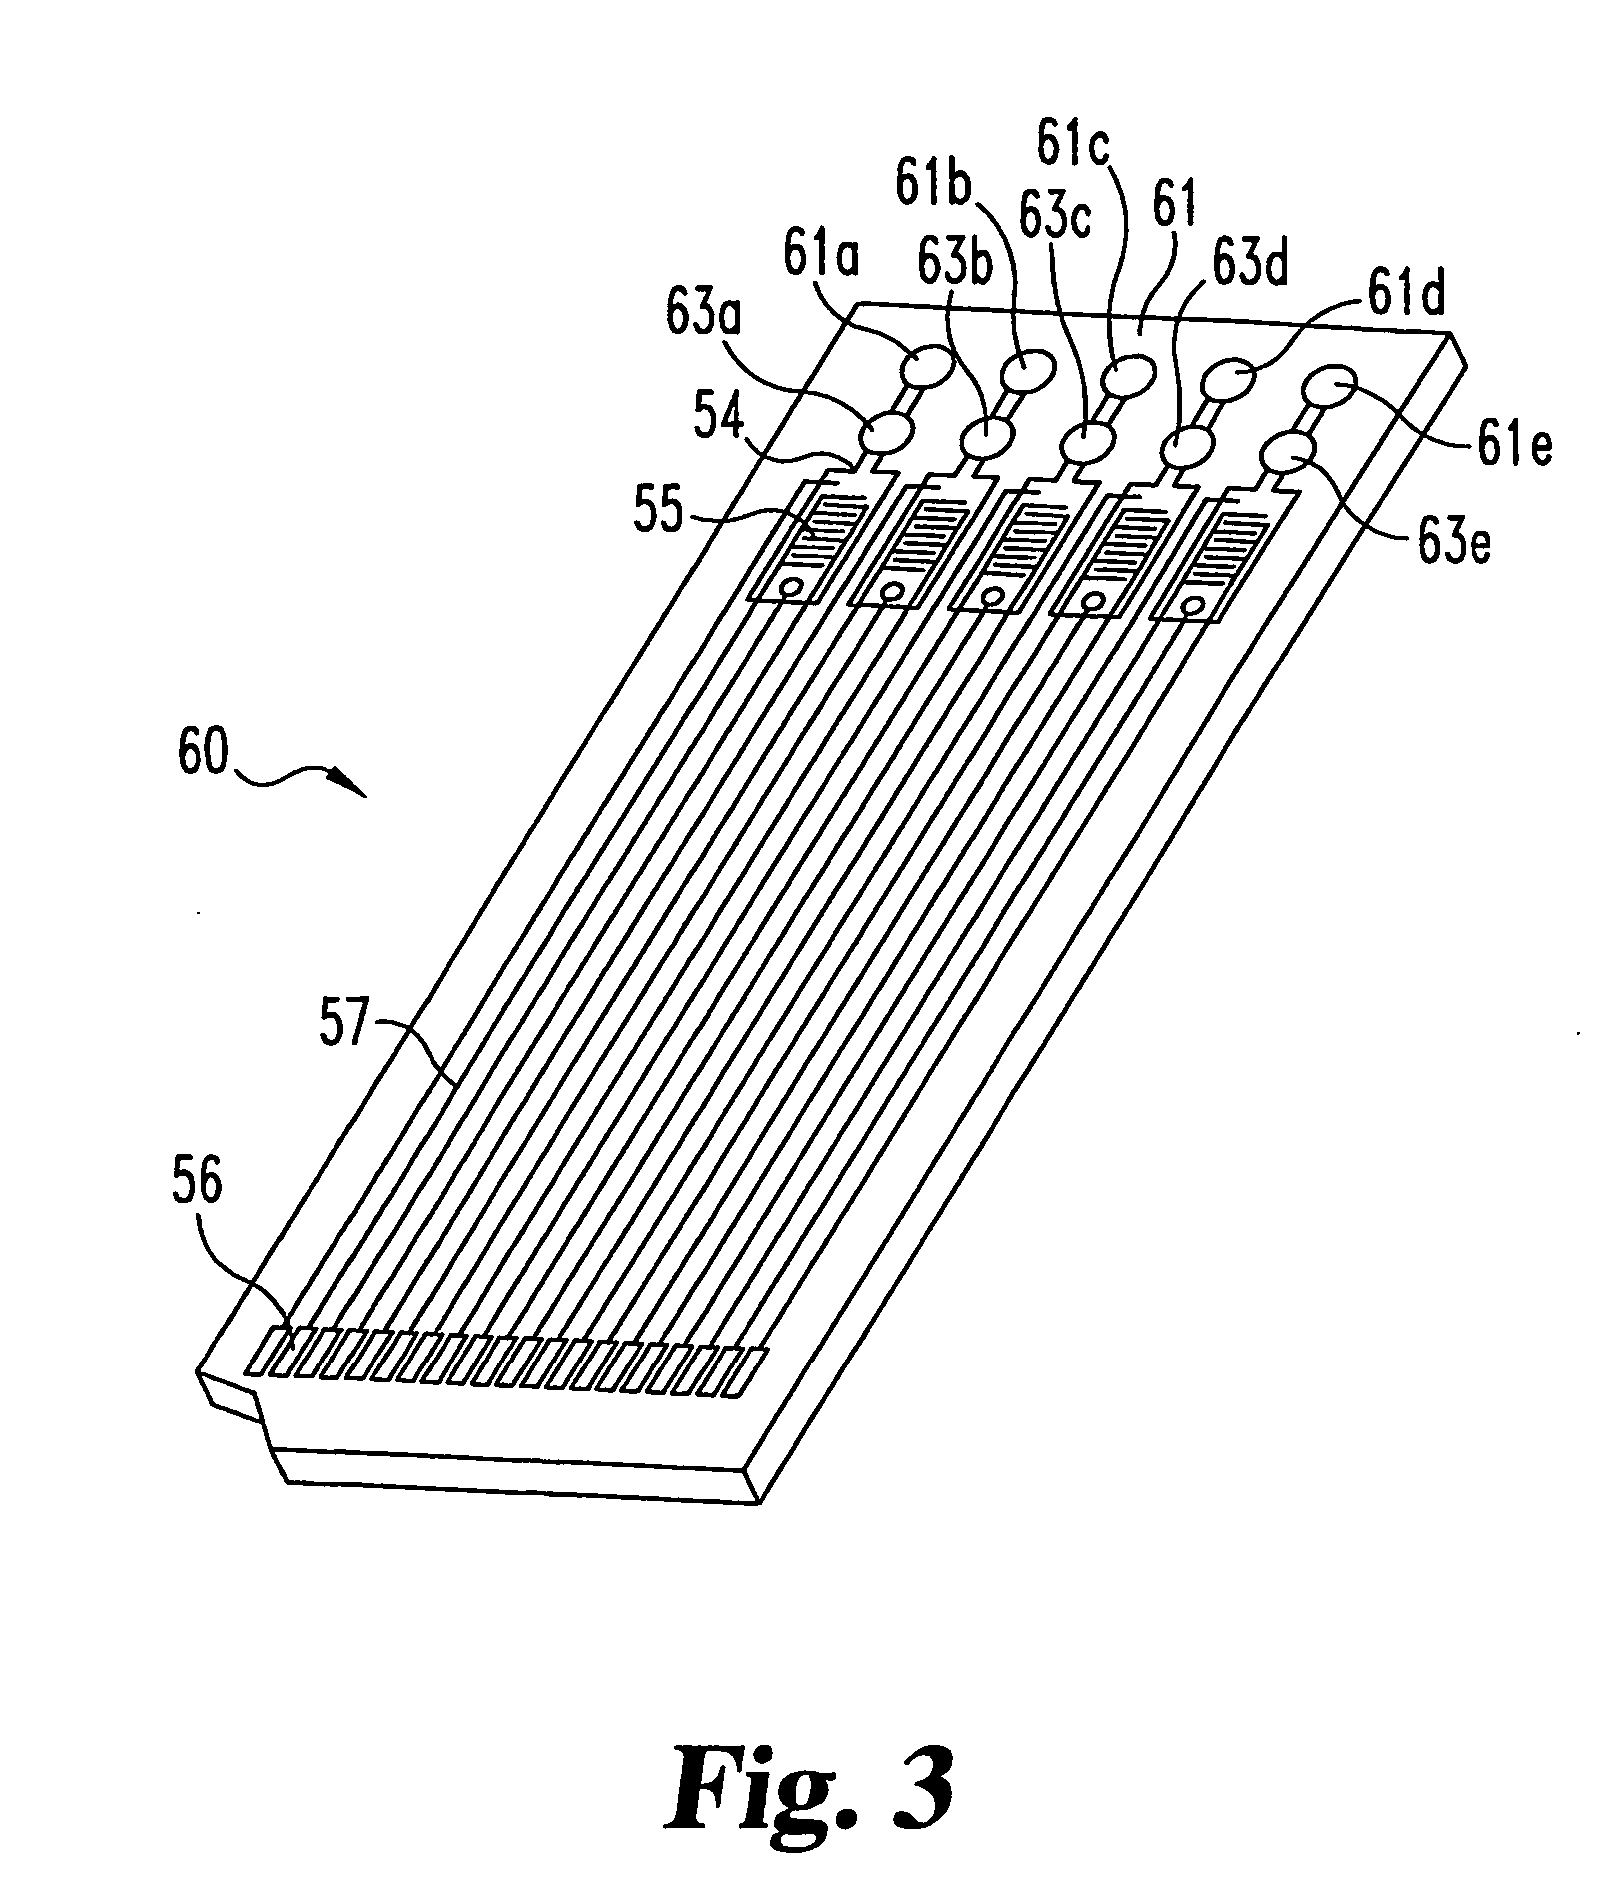 Electrochemical affinity biosensor system and methods